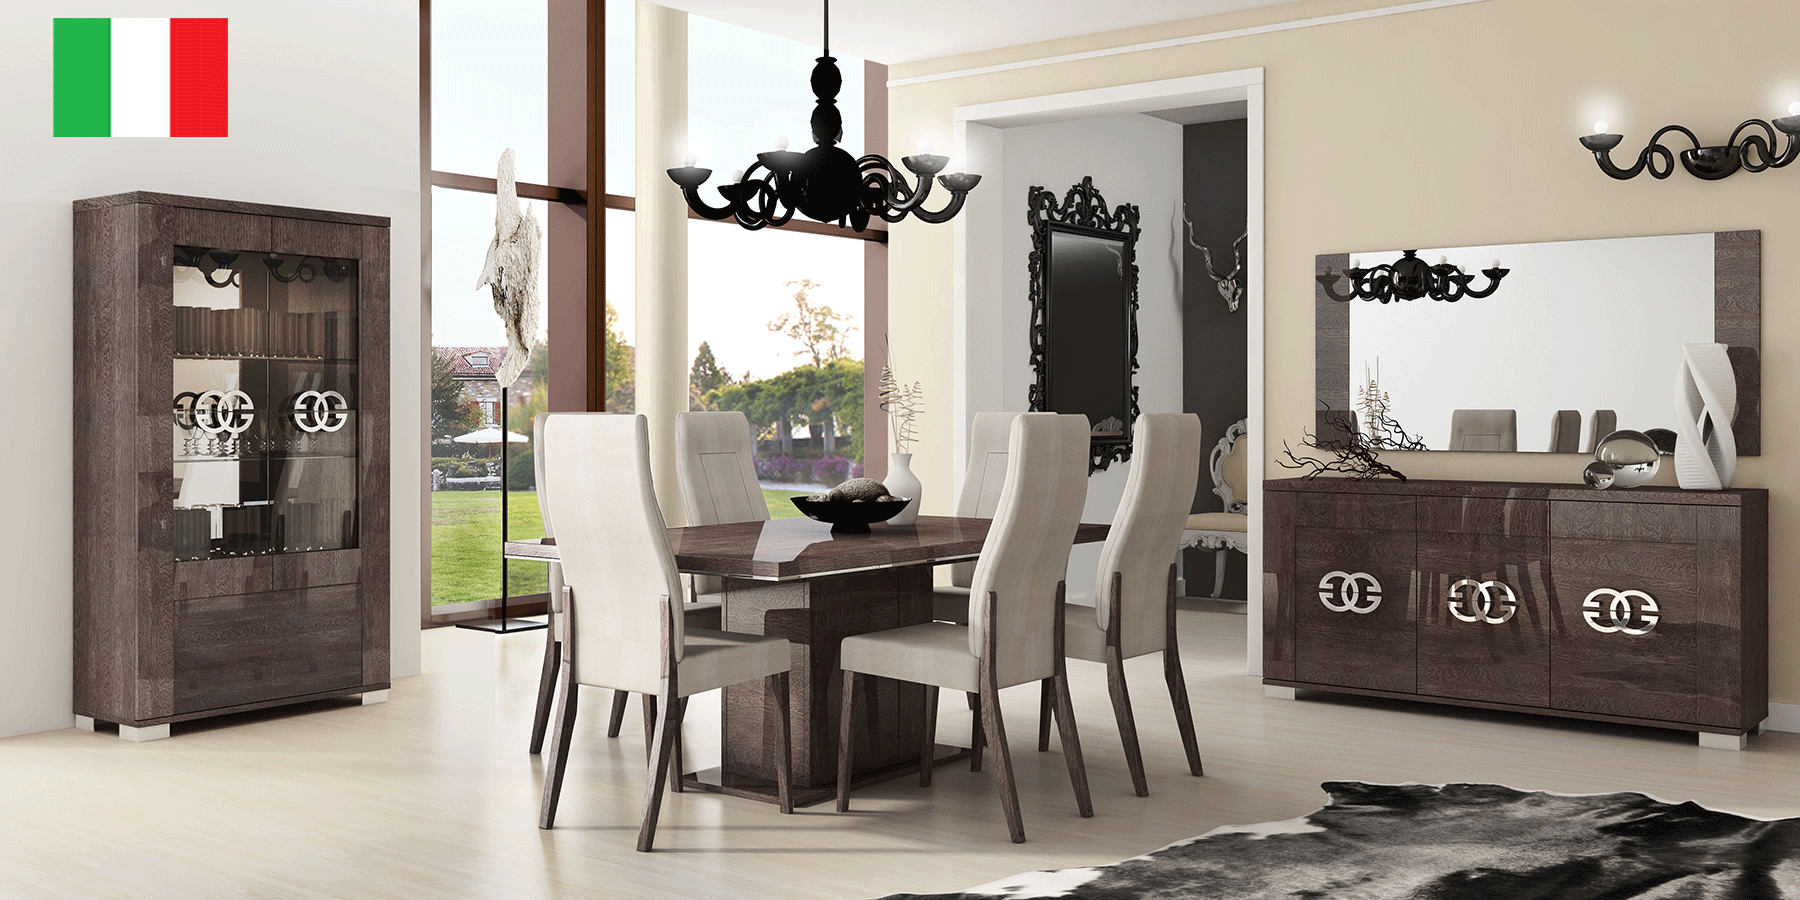 Brands Status Modern Collections, Italy Prestige Dining Room